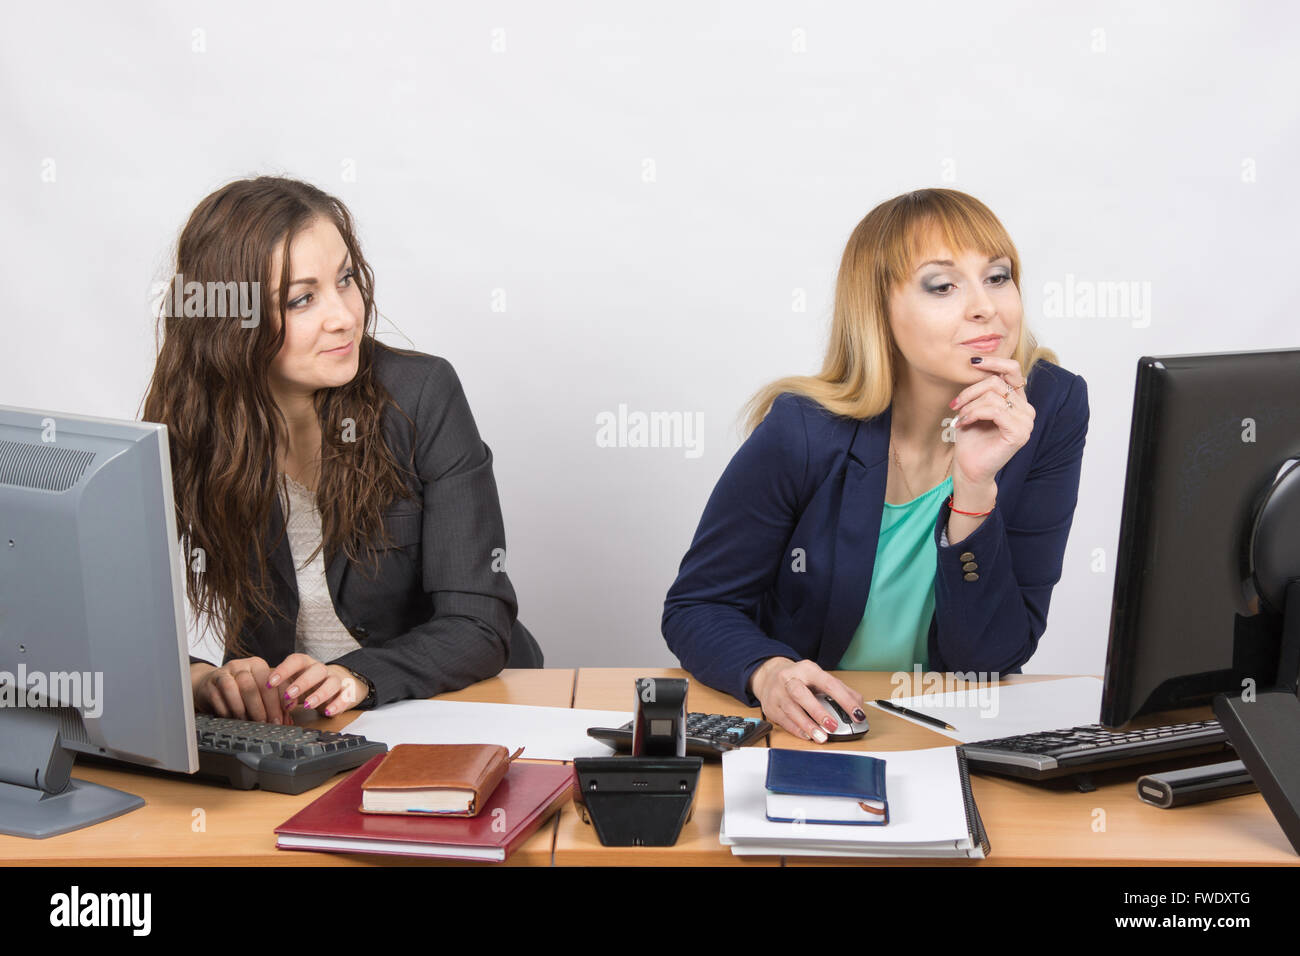 Office worker looking with distaste at the colleague sitting next to staring at a computer monitor Stock Photo